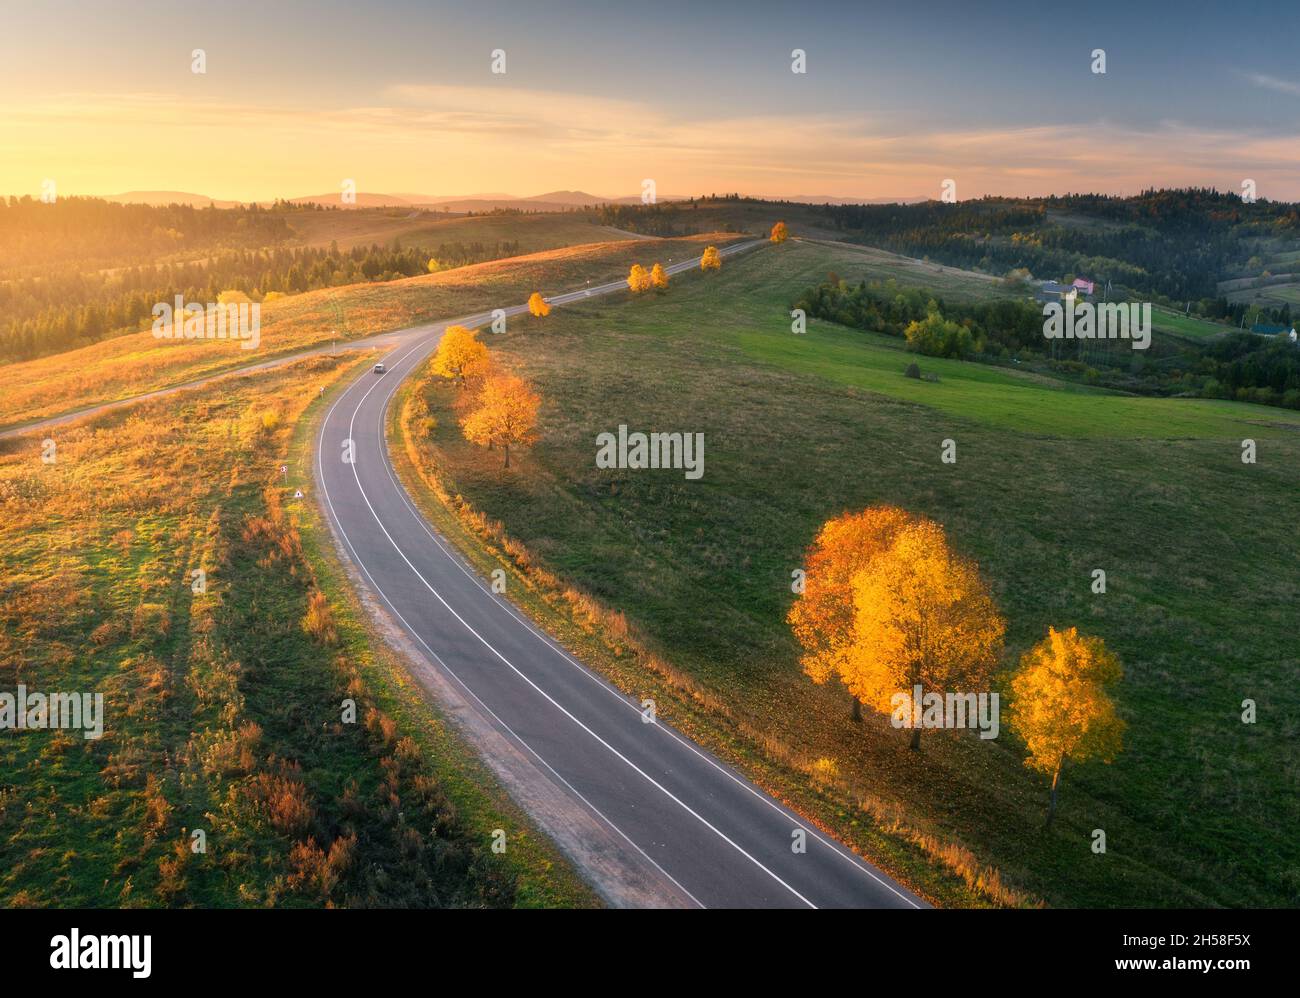 Aerial view of winding road in autumn forest at sunset Stock Photo